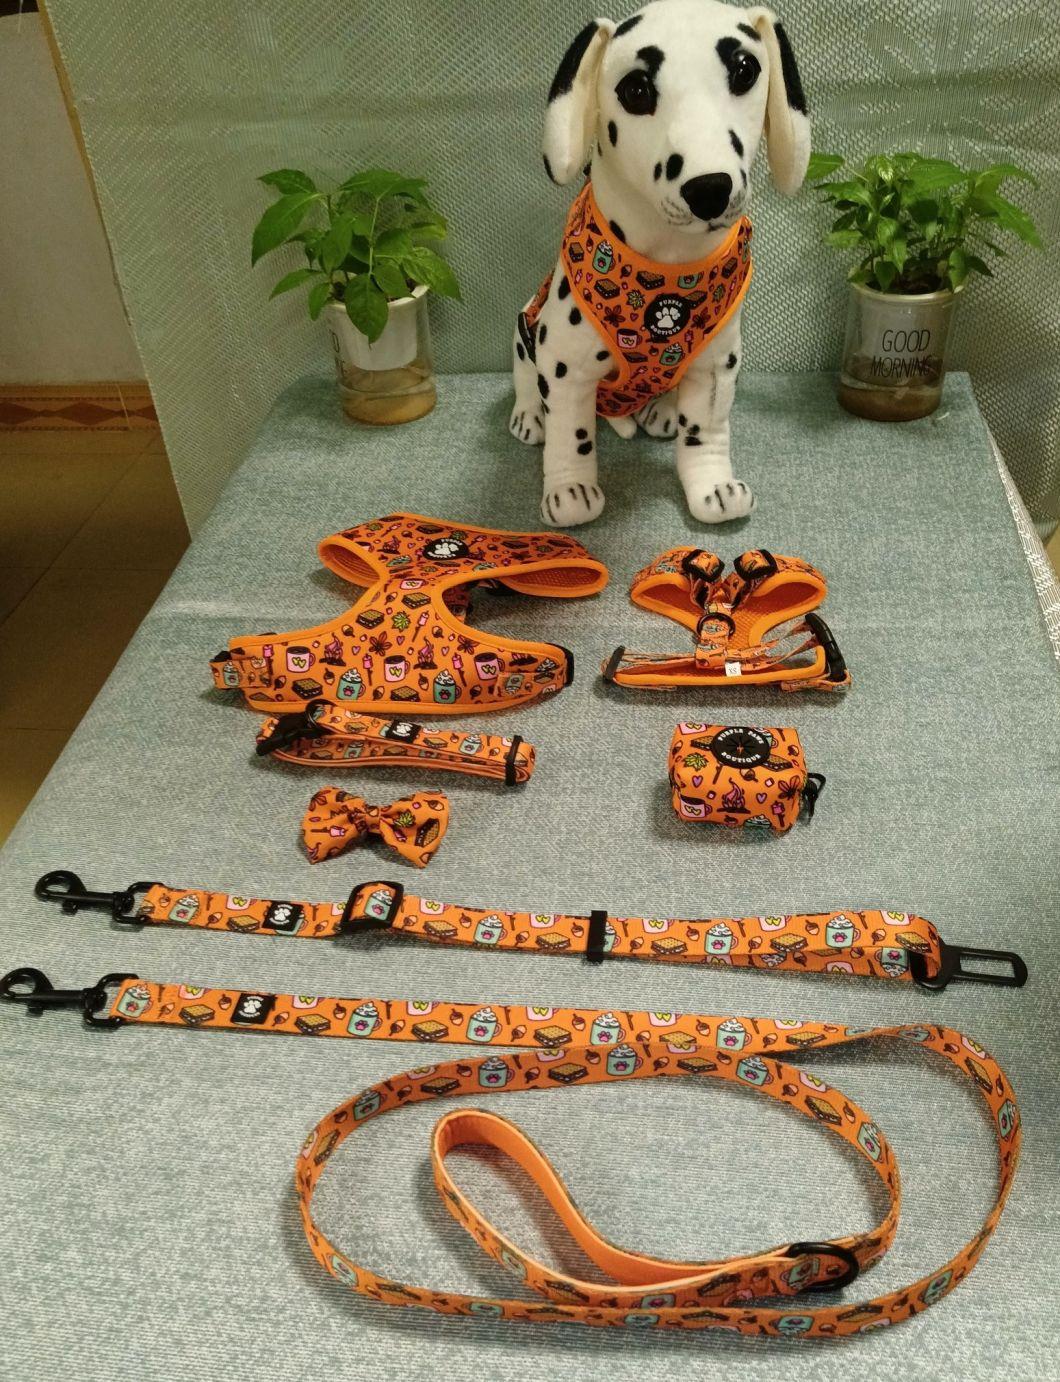 All Kinds of Design Full Sets Dog/Pets Harness Factory Price/Harness for Dog/Xx Small Dog Harness/Dog Collars